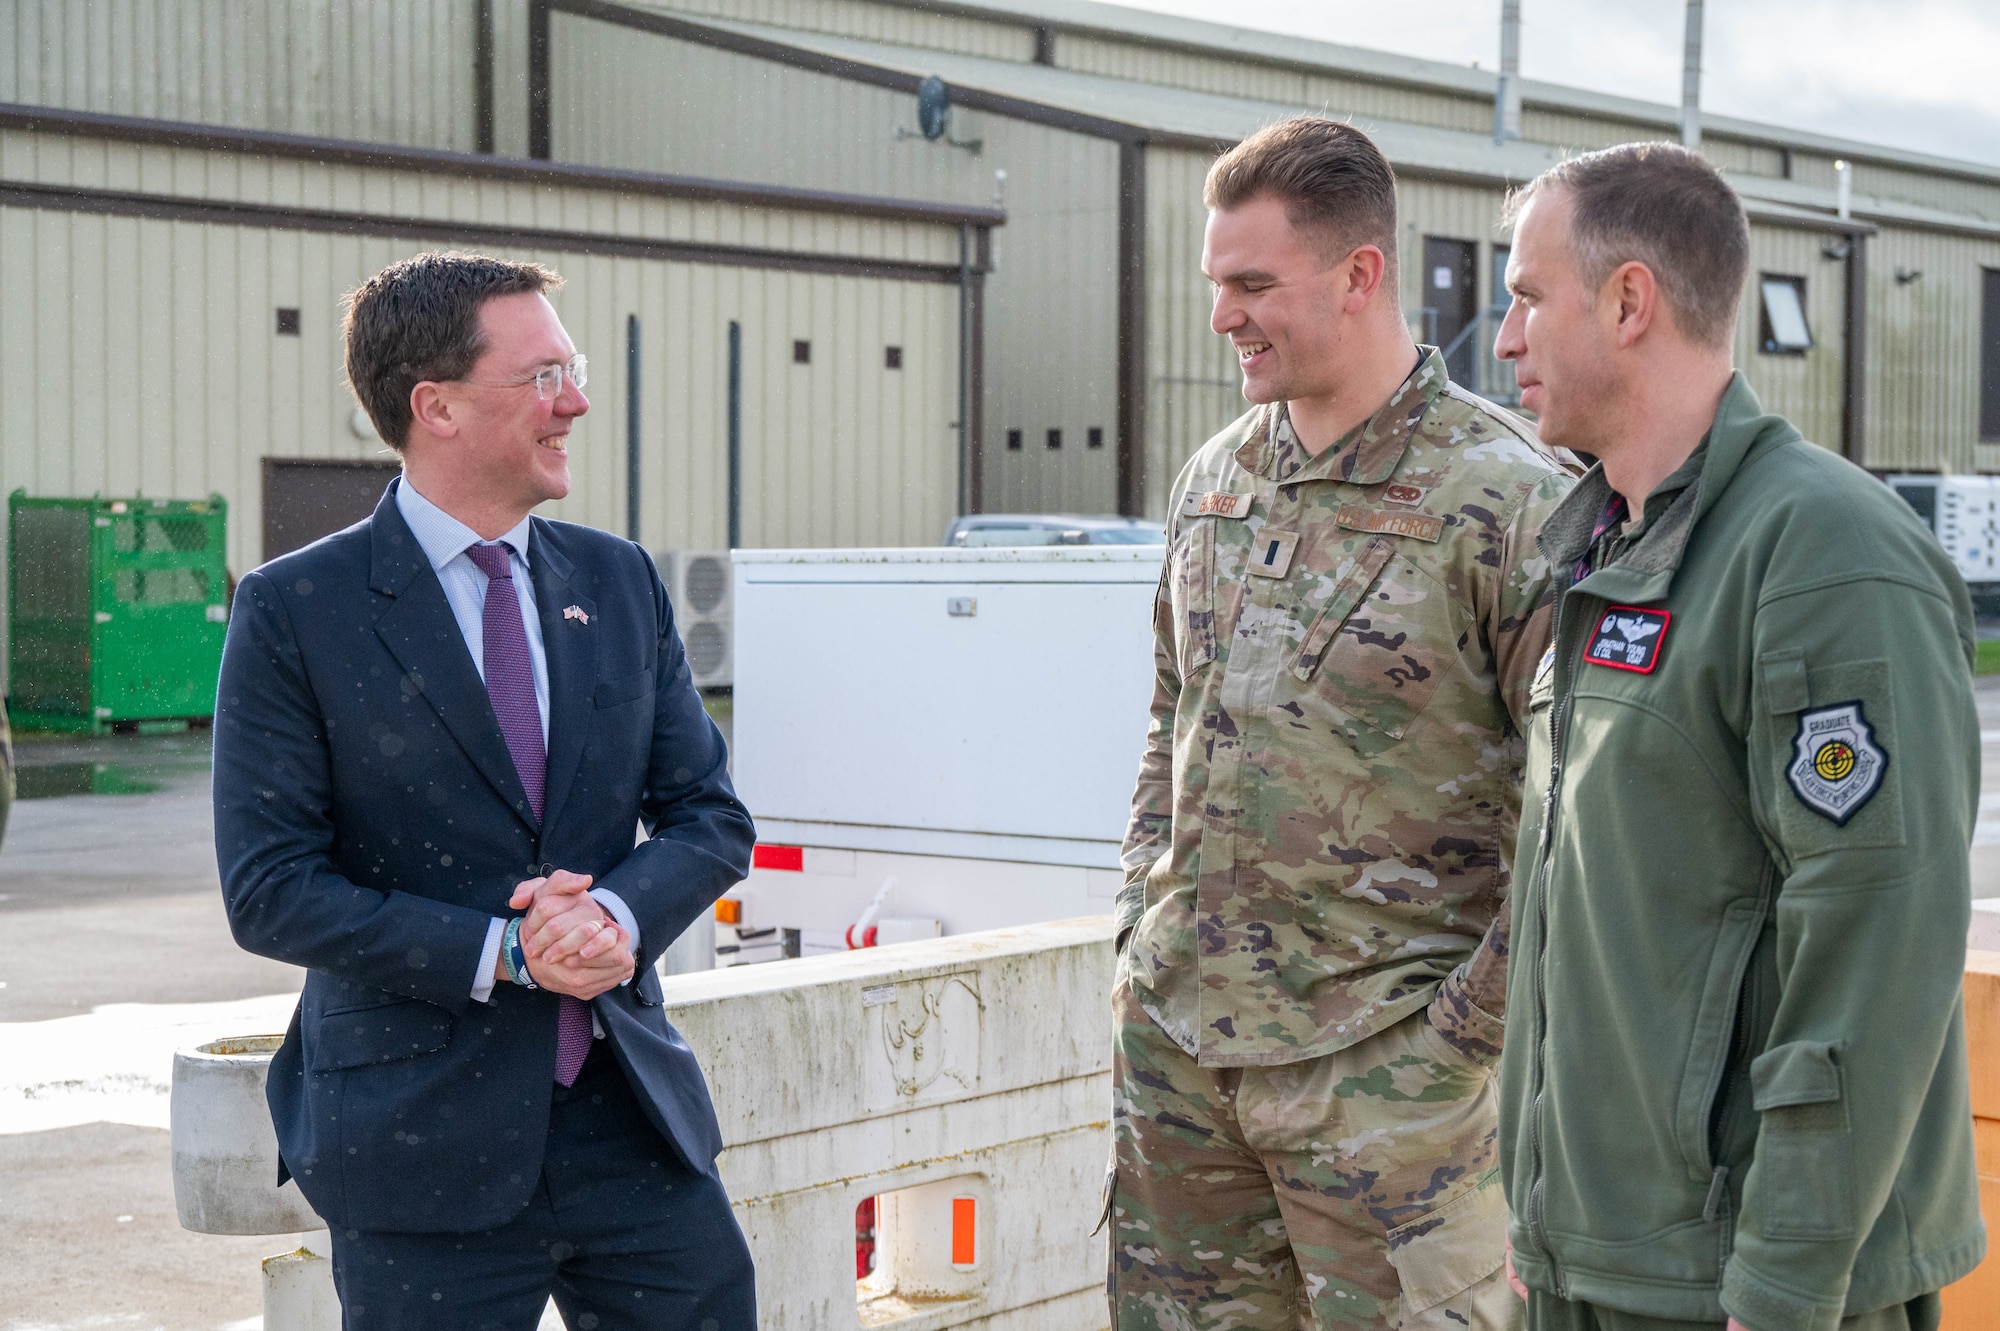 Members of the 99th Expeditionary Reconnaissance Squadron speak with Member of Parliament Robert Courts